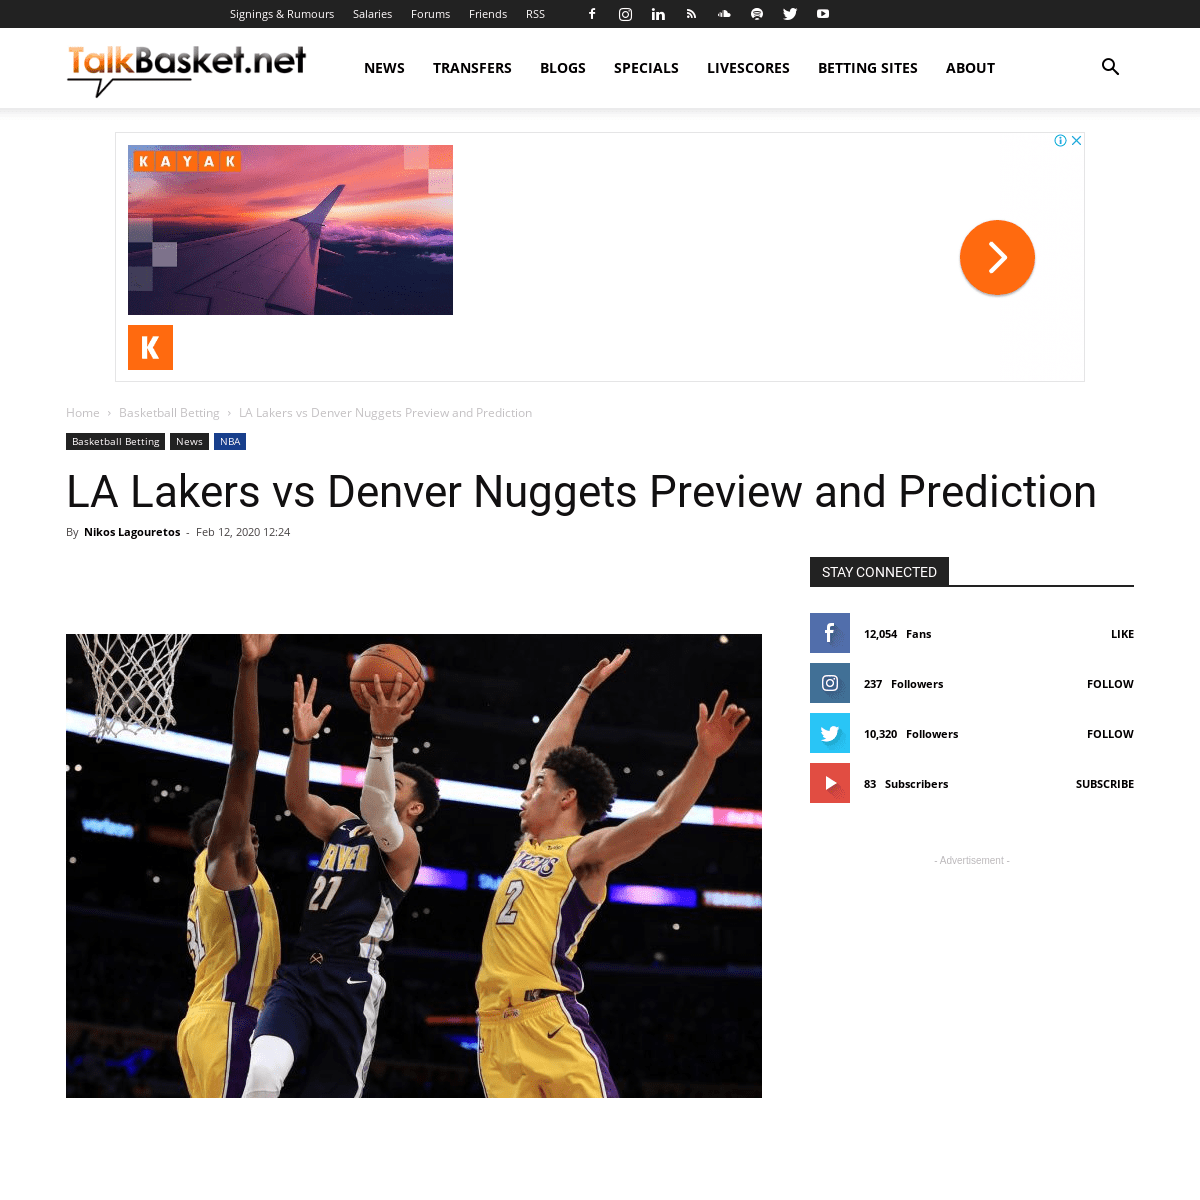 A complete backup of www.talkbasket.net/69407-la-lakers-vs-denver-nuggets-preview-and-prediction